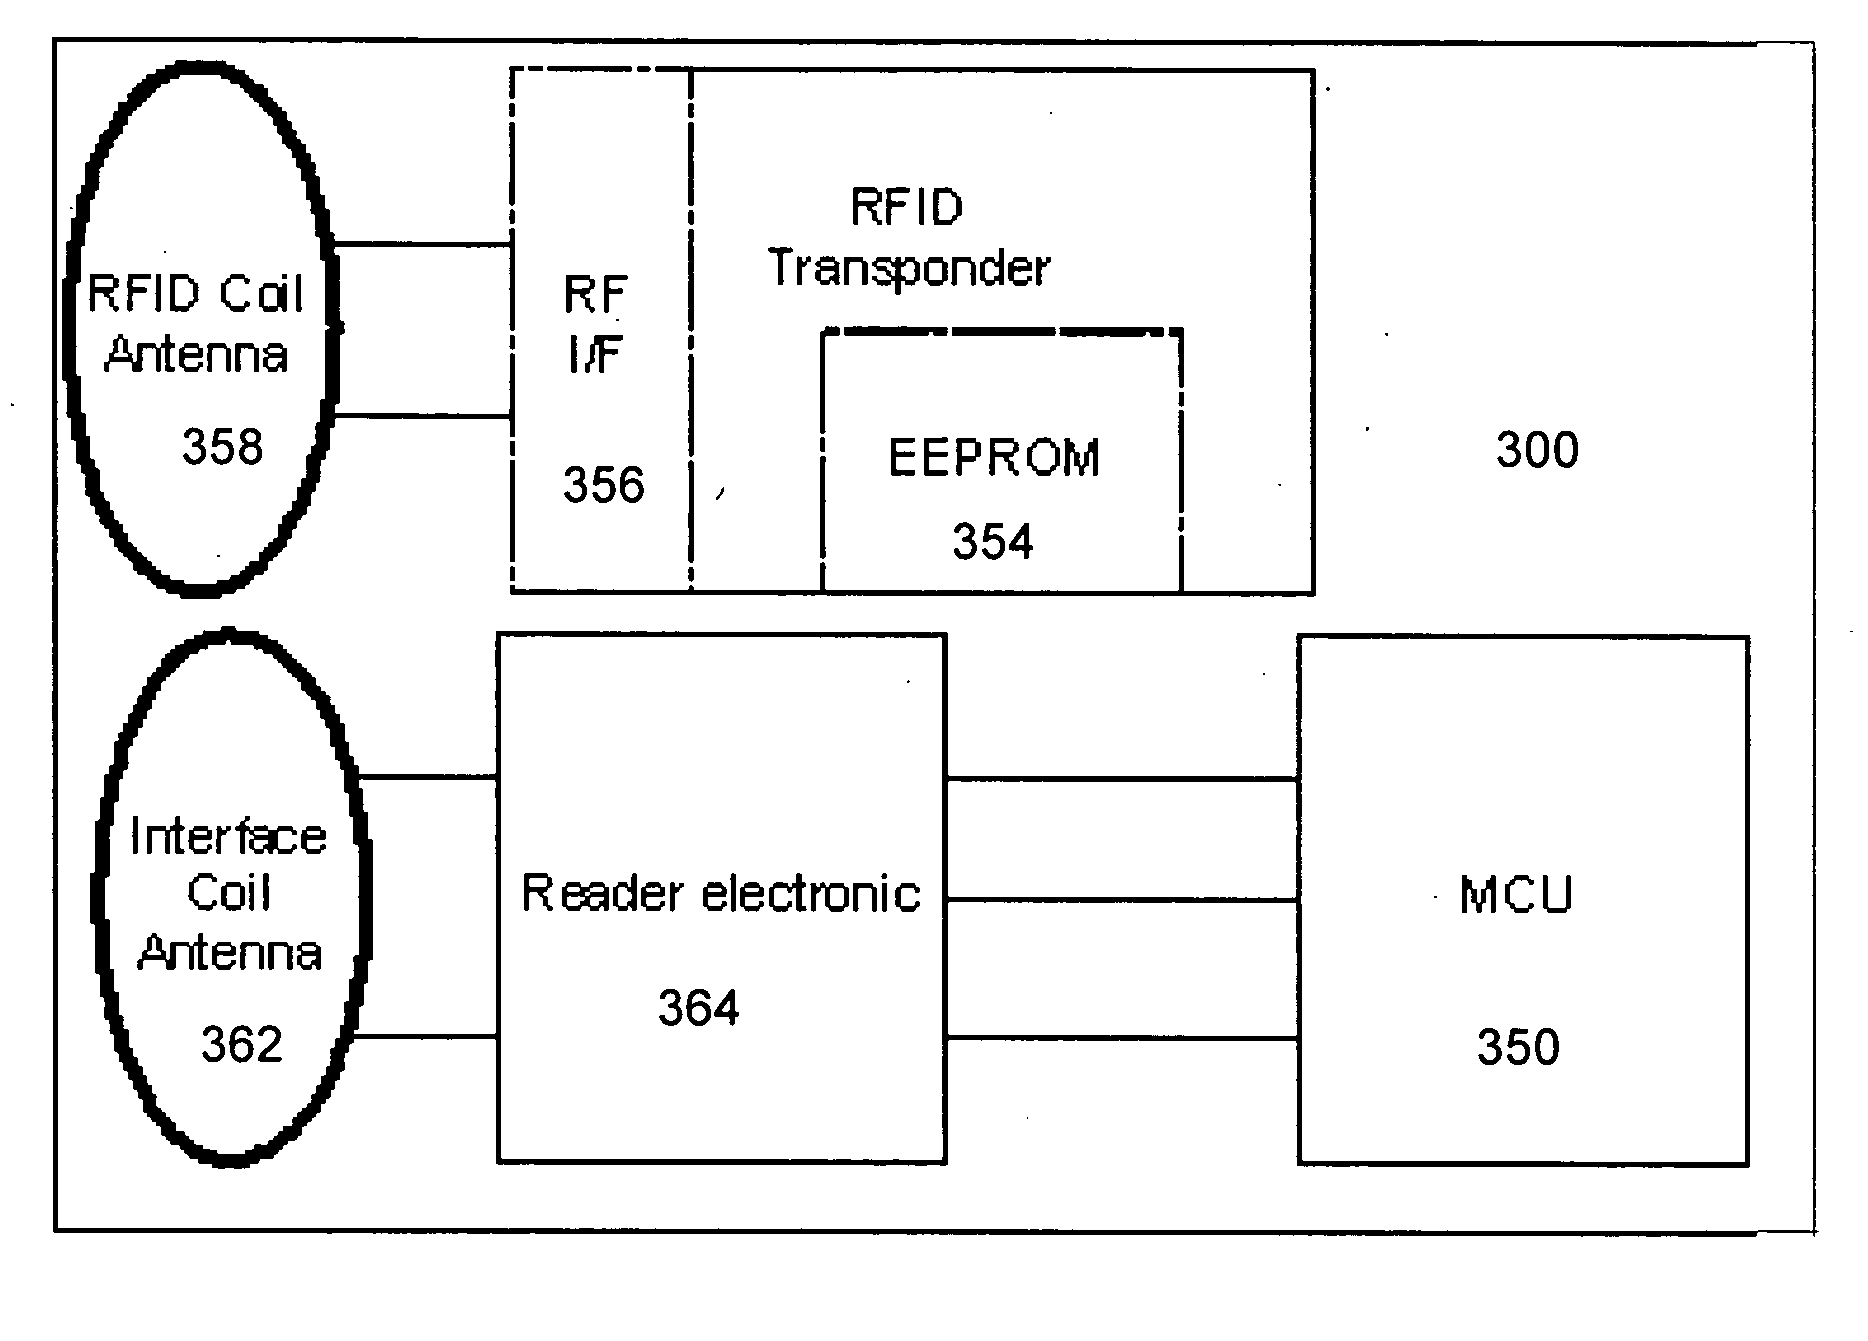 RFID auto-connect for wireless devices